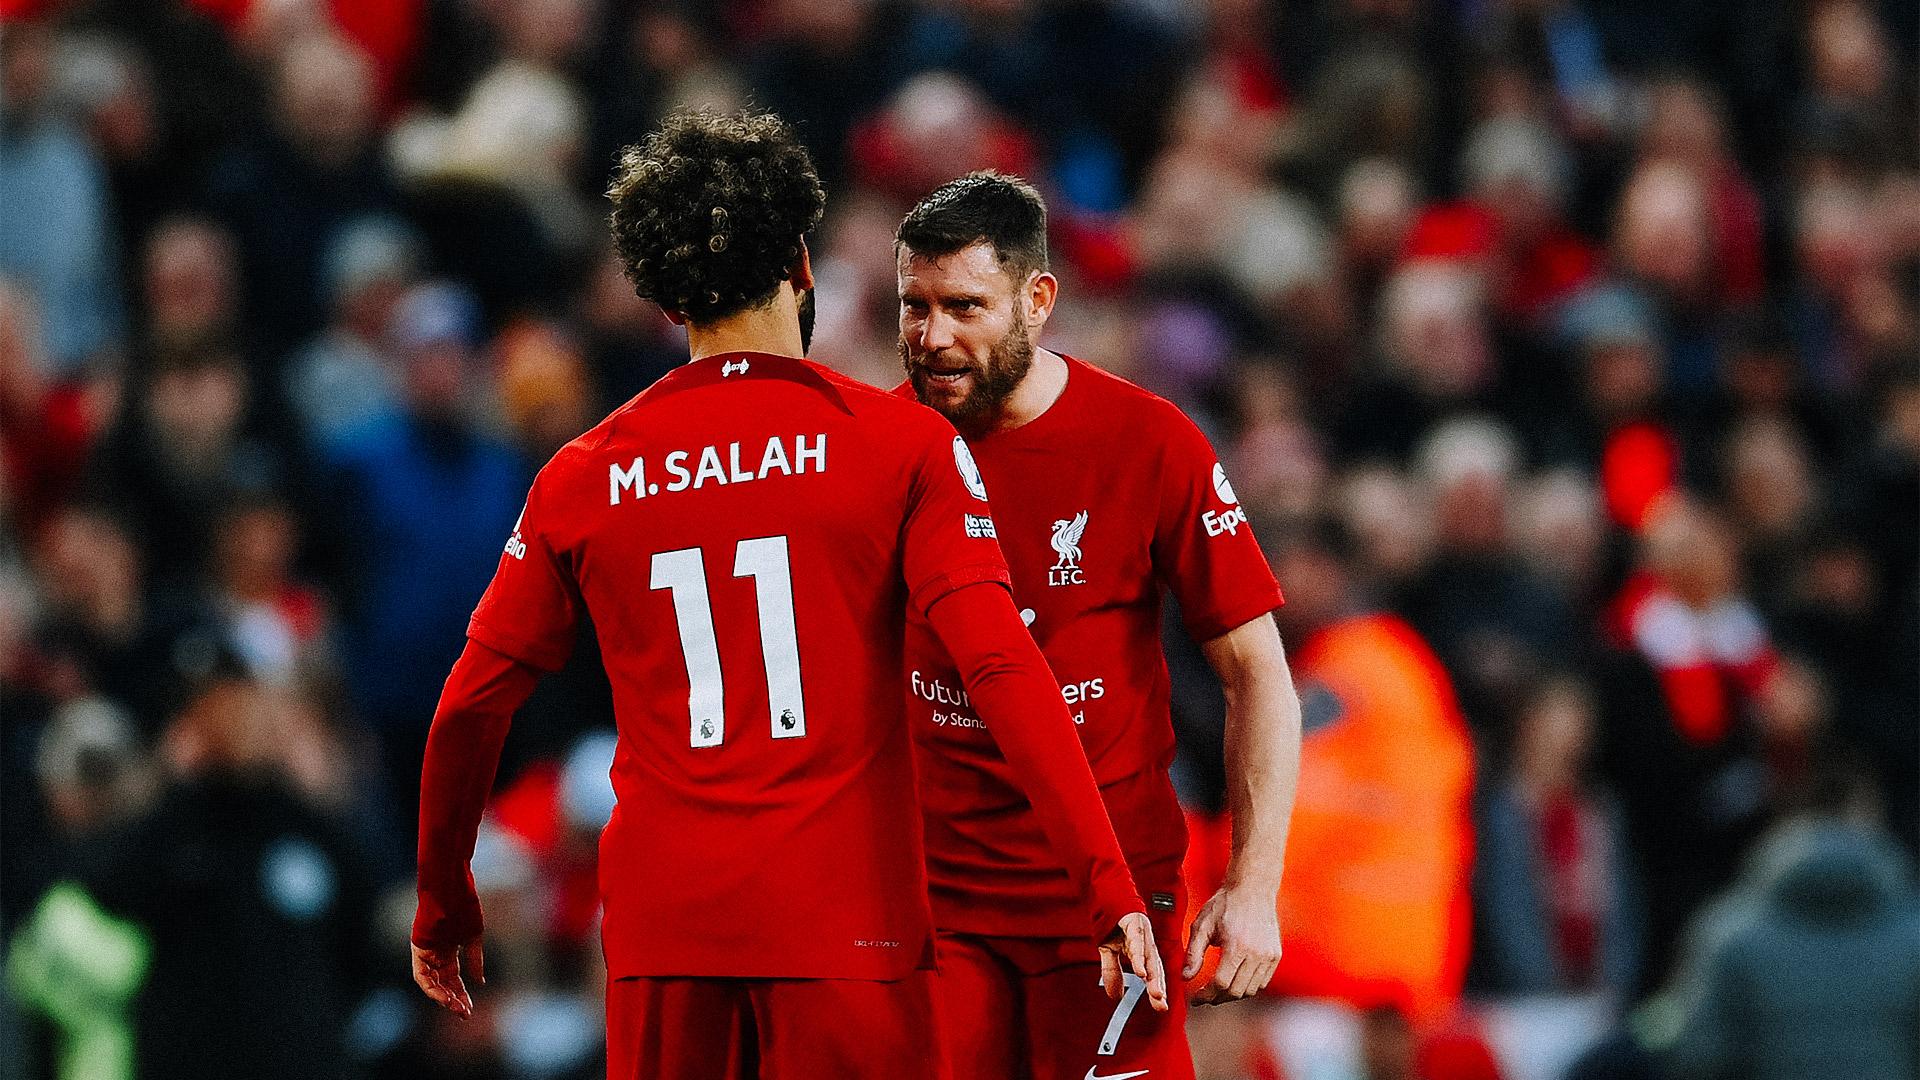 Liverpool 1-0 Man City Five talking points from Anfield